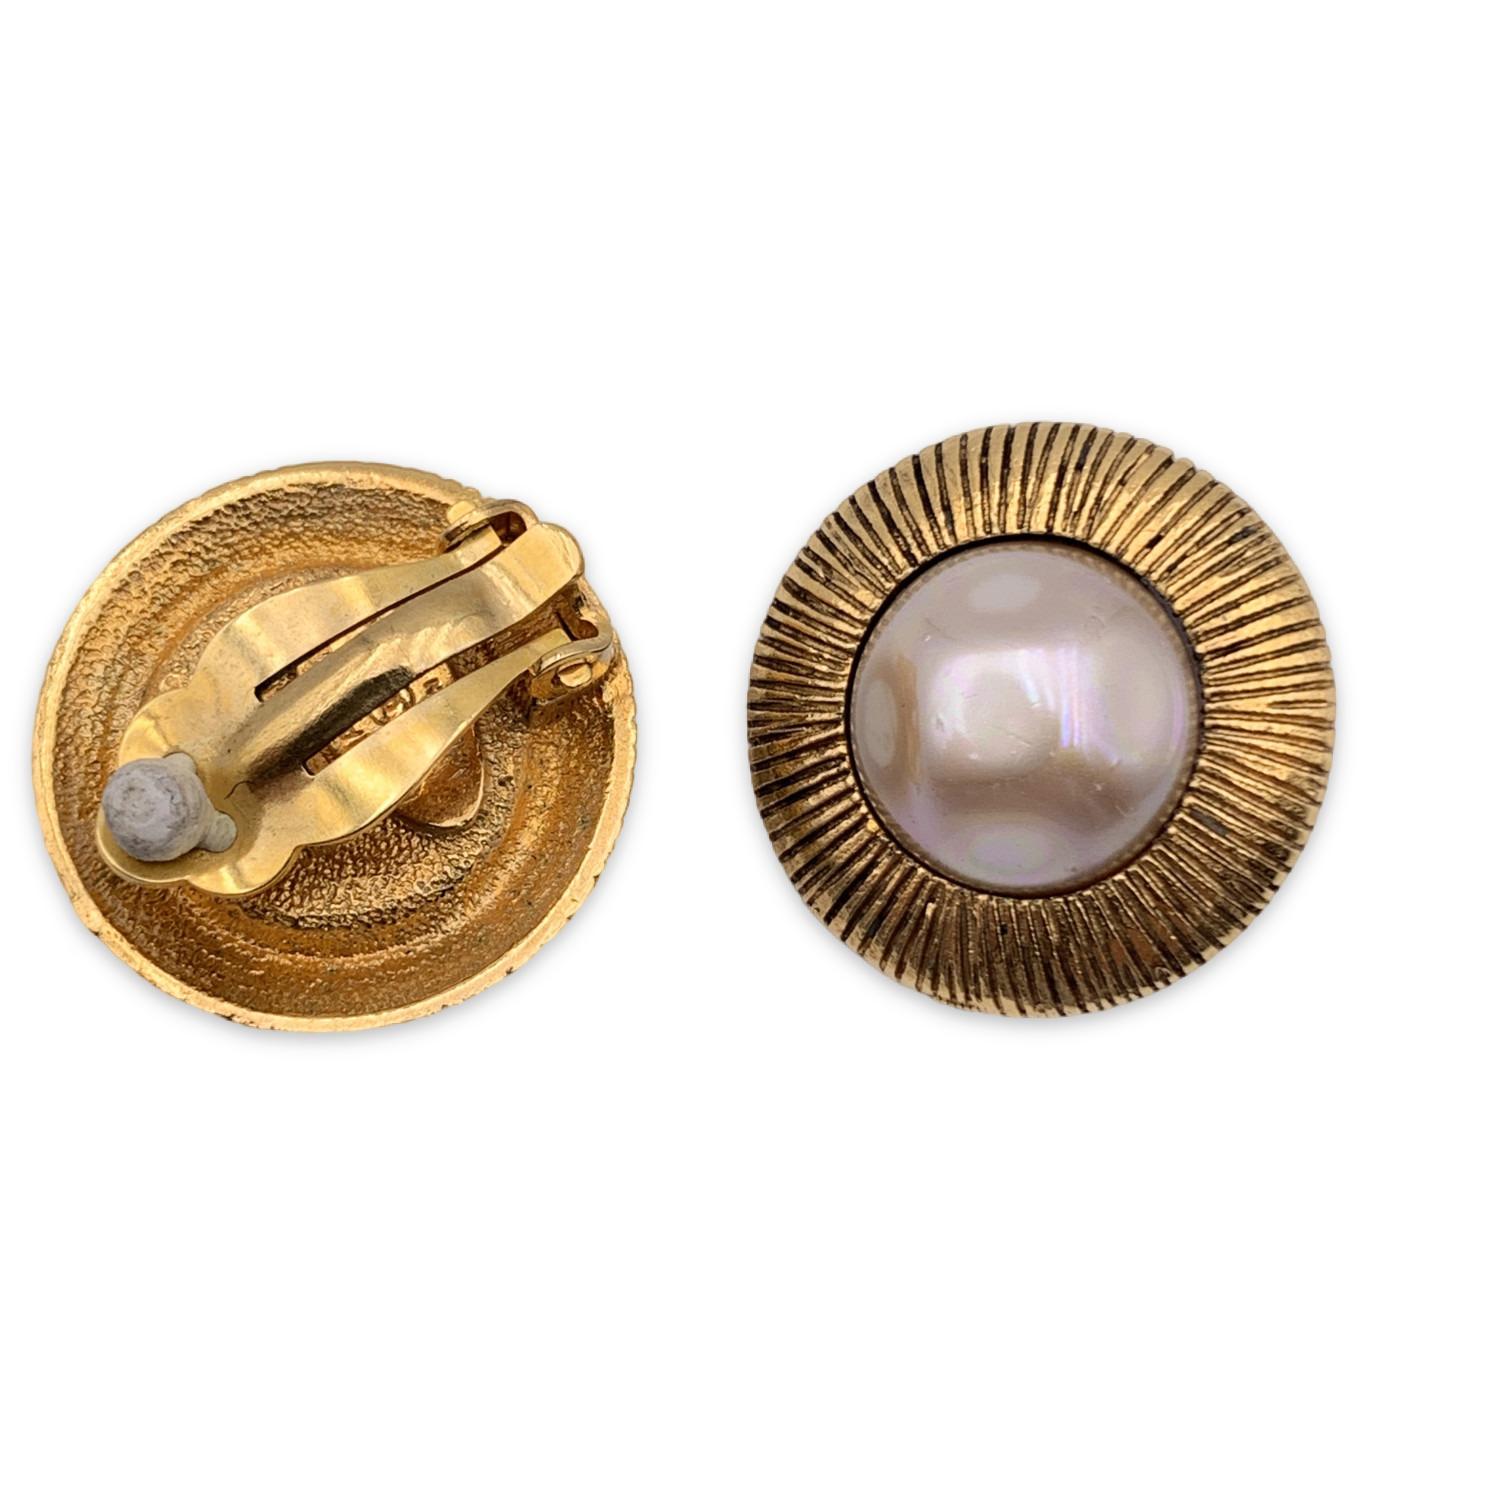 Gorgeous vintage CHANEL earrings. Faux Pearl and engraved gold metal round frame. Clip-on earrings. Signed 'Chanel 2 CC 3 - Made in France' oval hallmark on the reverse of the earring. Diameter: 1 inch. - 2,5 cm

Condition

B - VERY GOOD

Gently